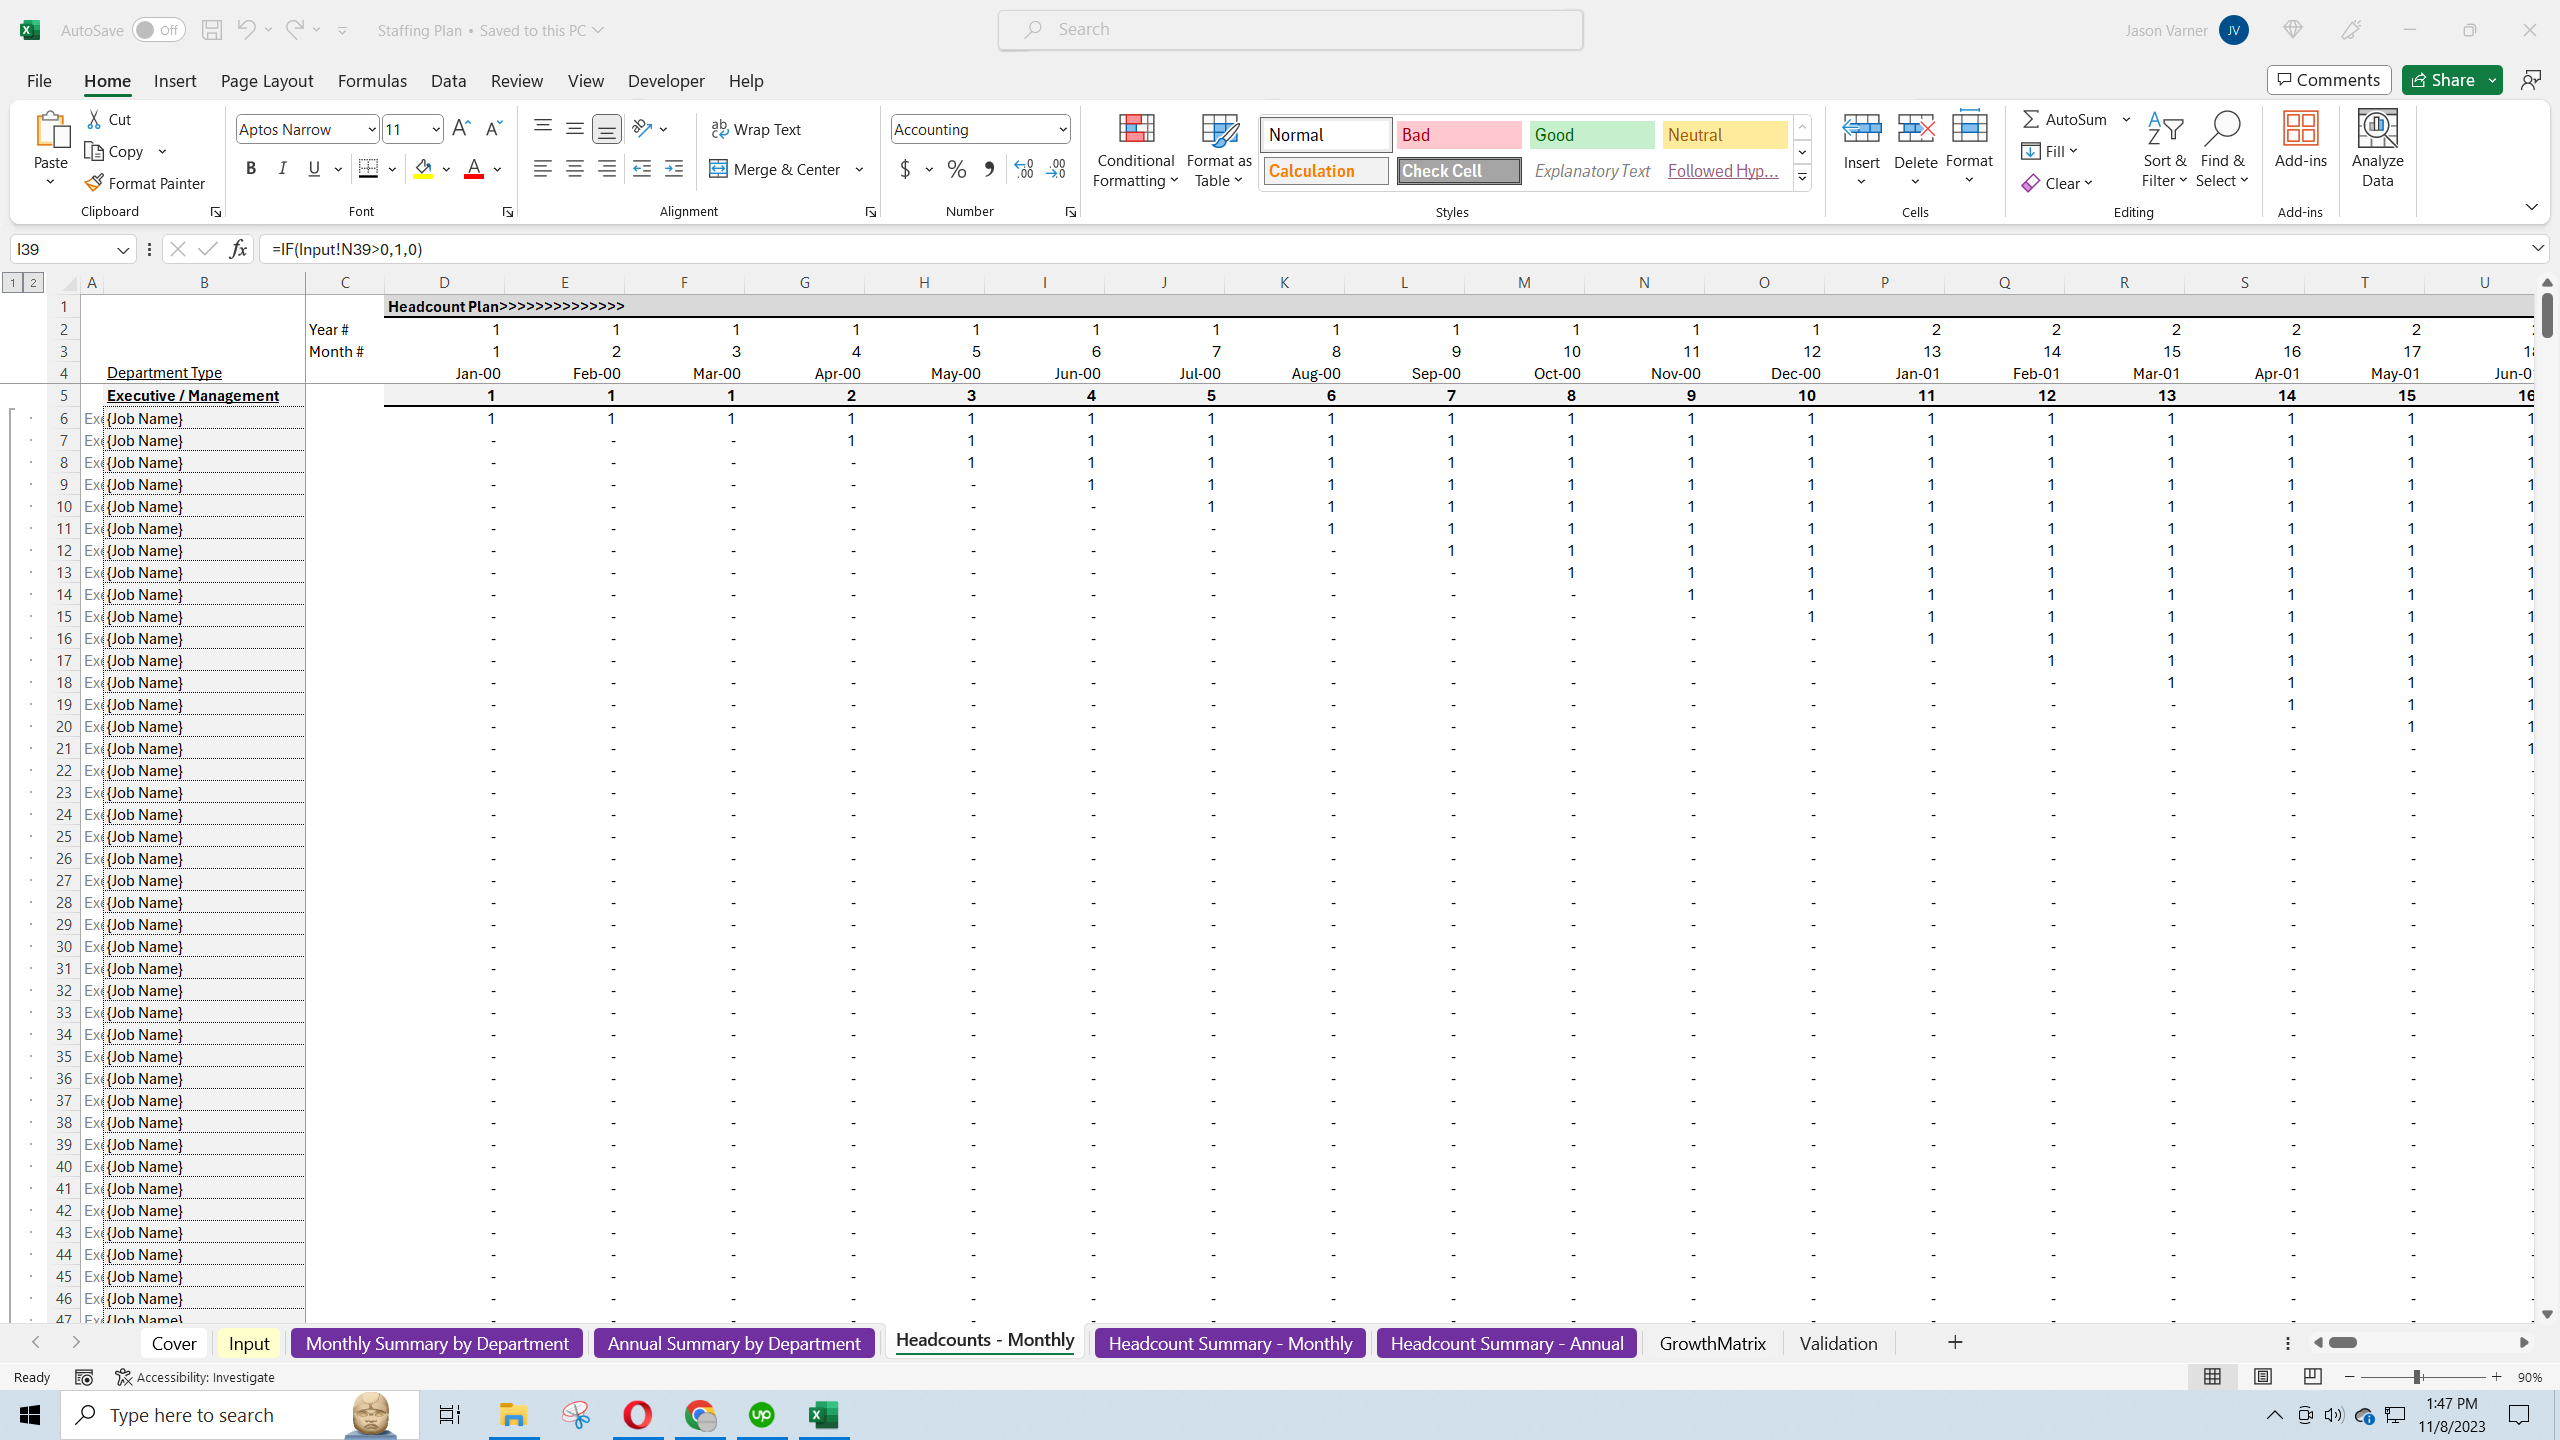 Staffing Cost Projection Plan (Excel template (XLSX)) Preview Image